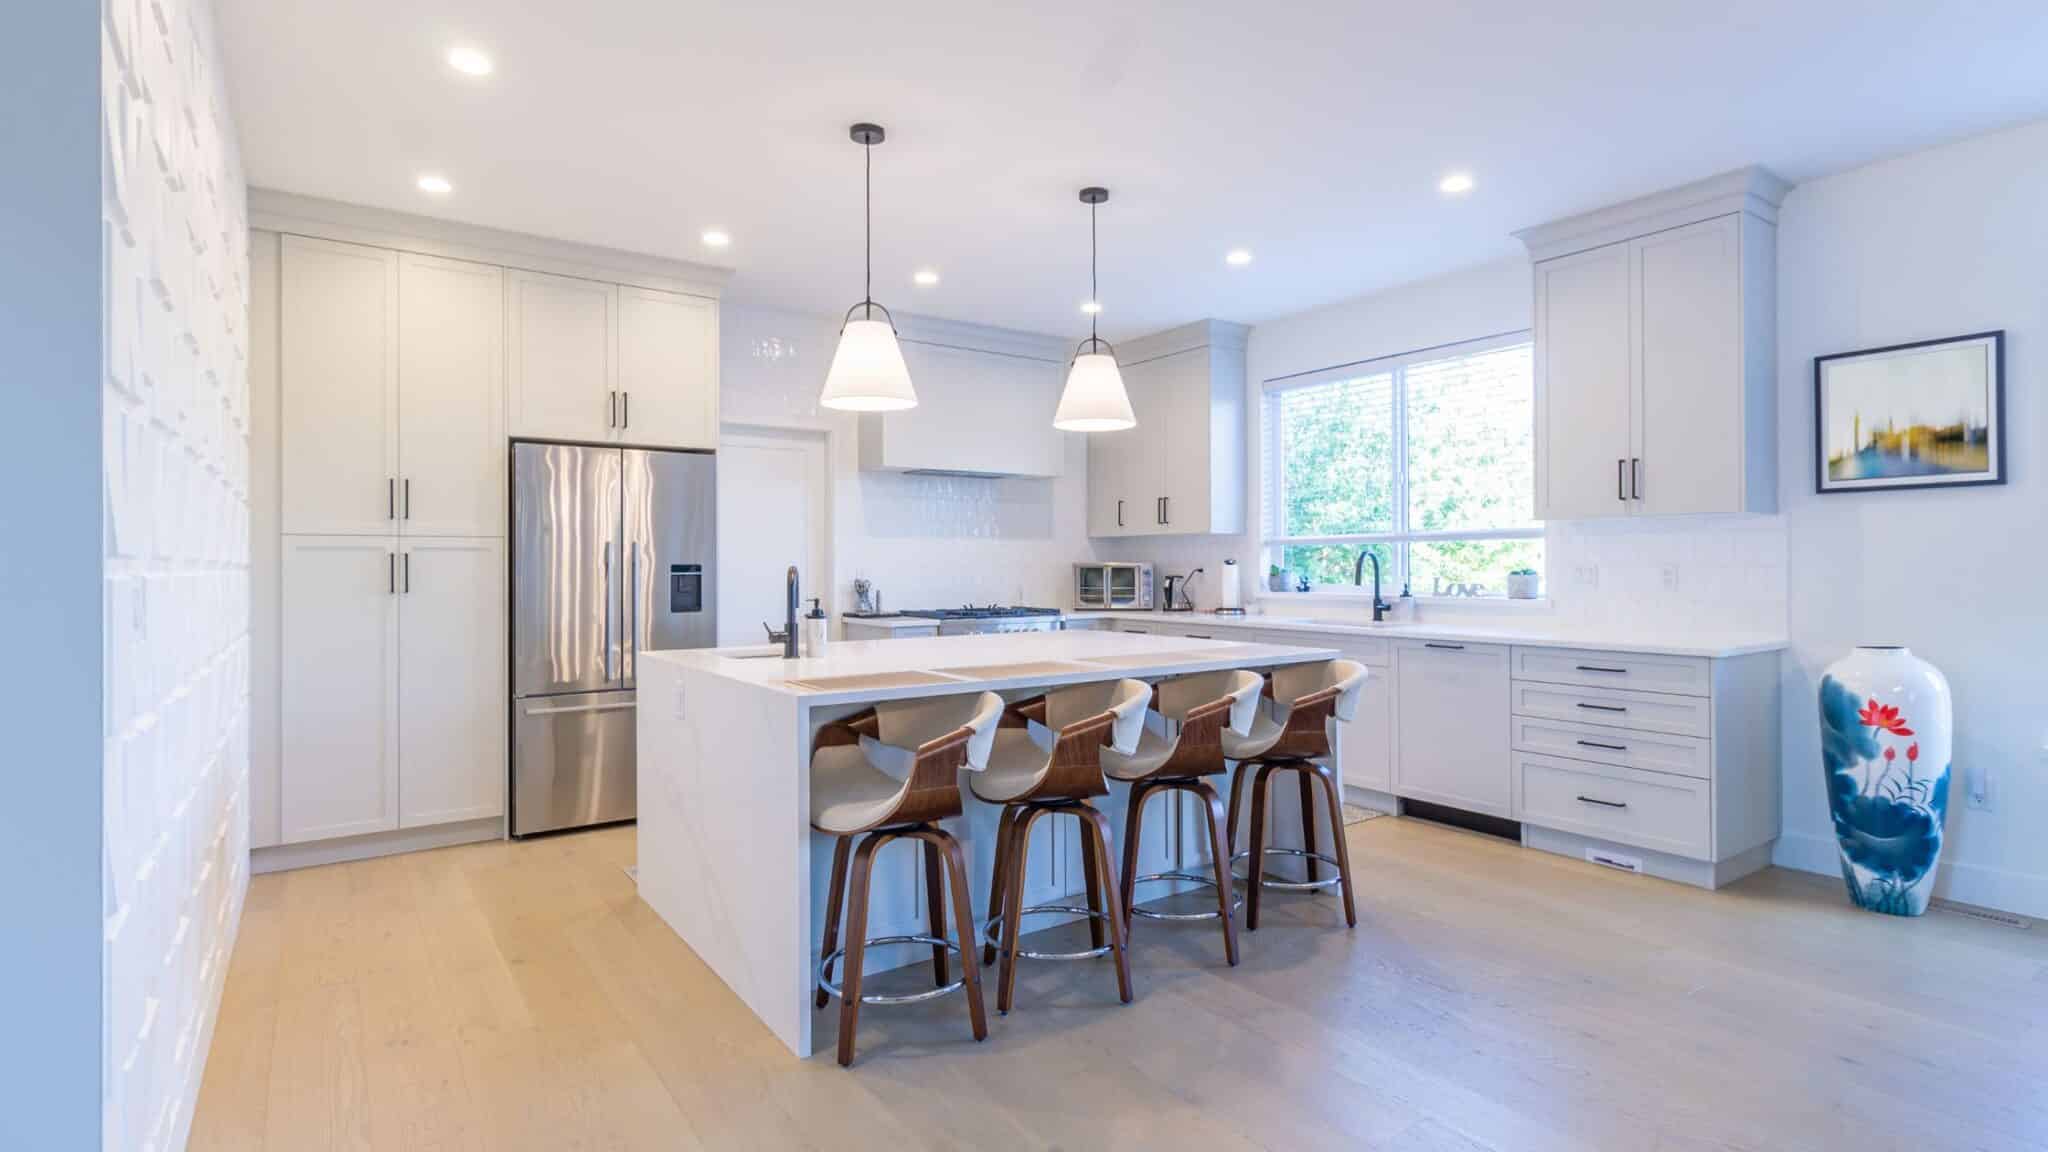 Tips for buying countertops in Dallas